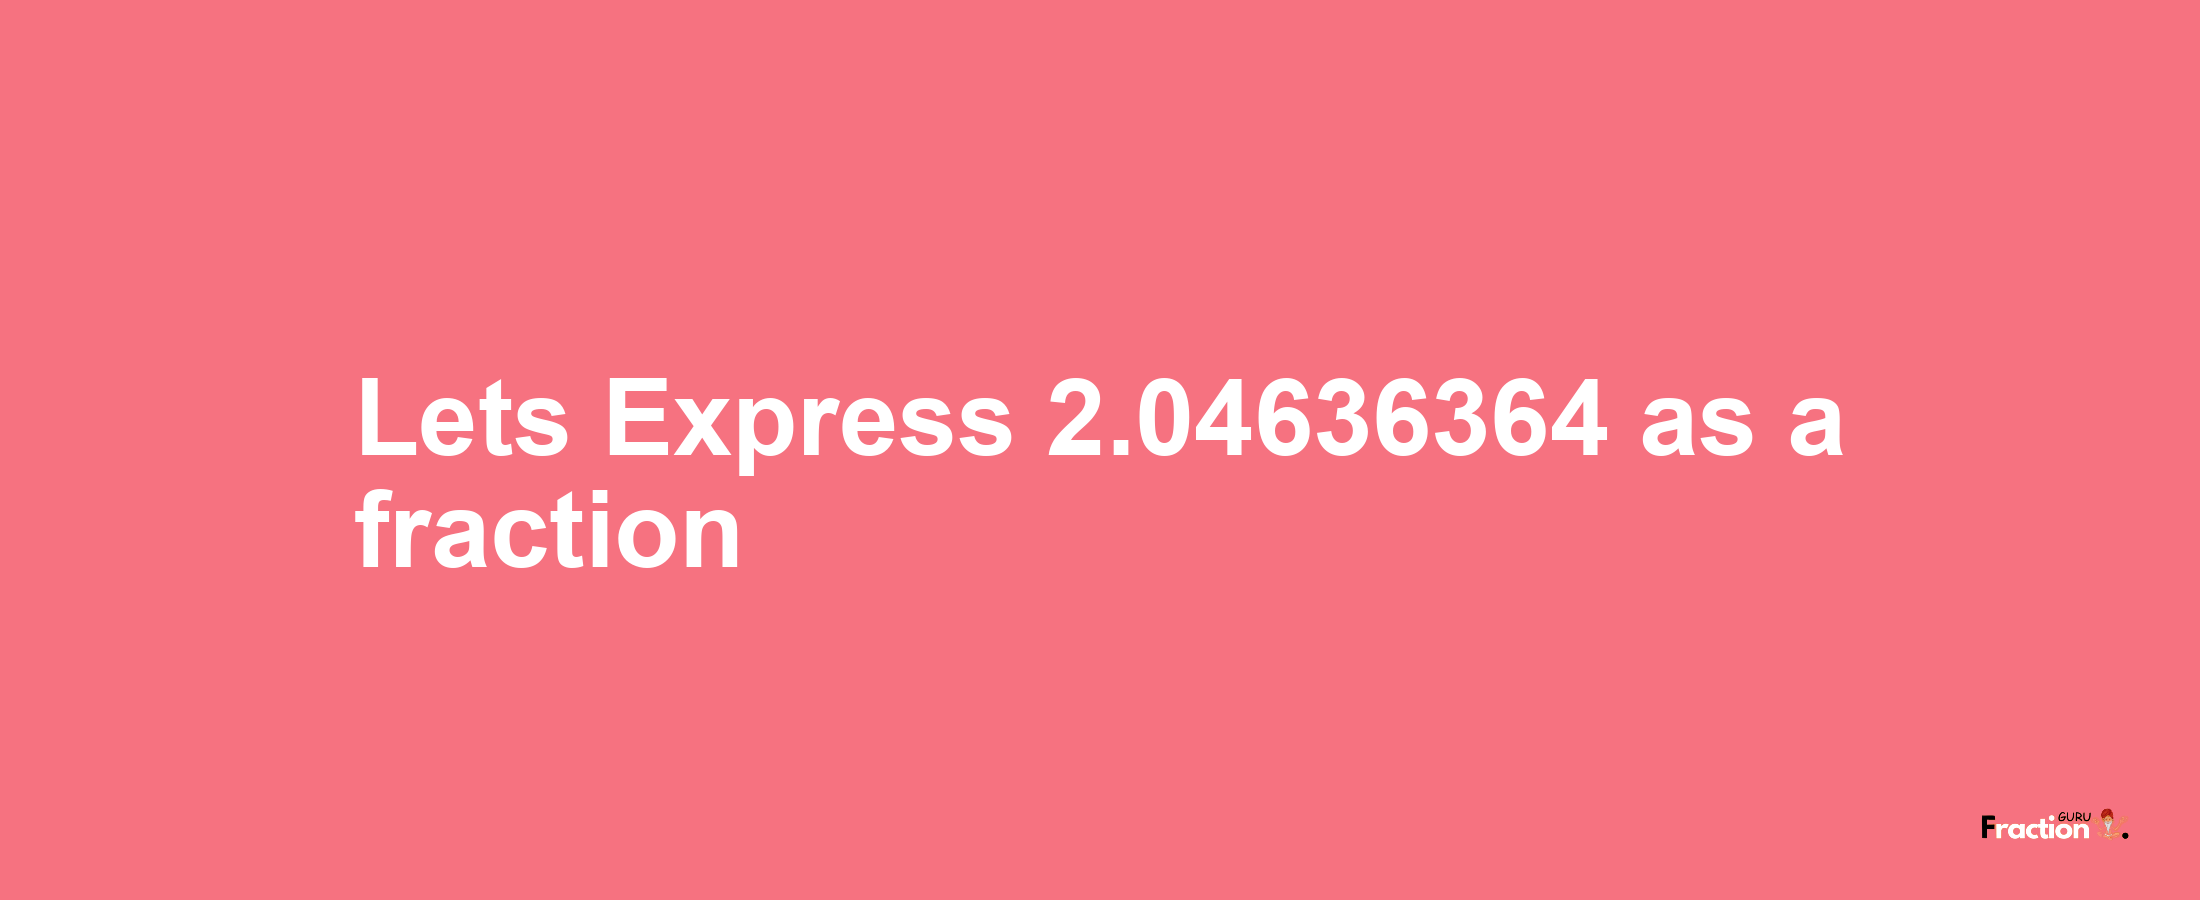 Lets Express 2.04636364 as afraction